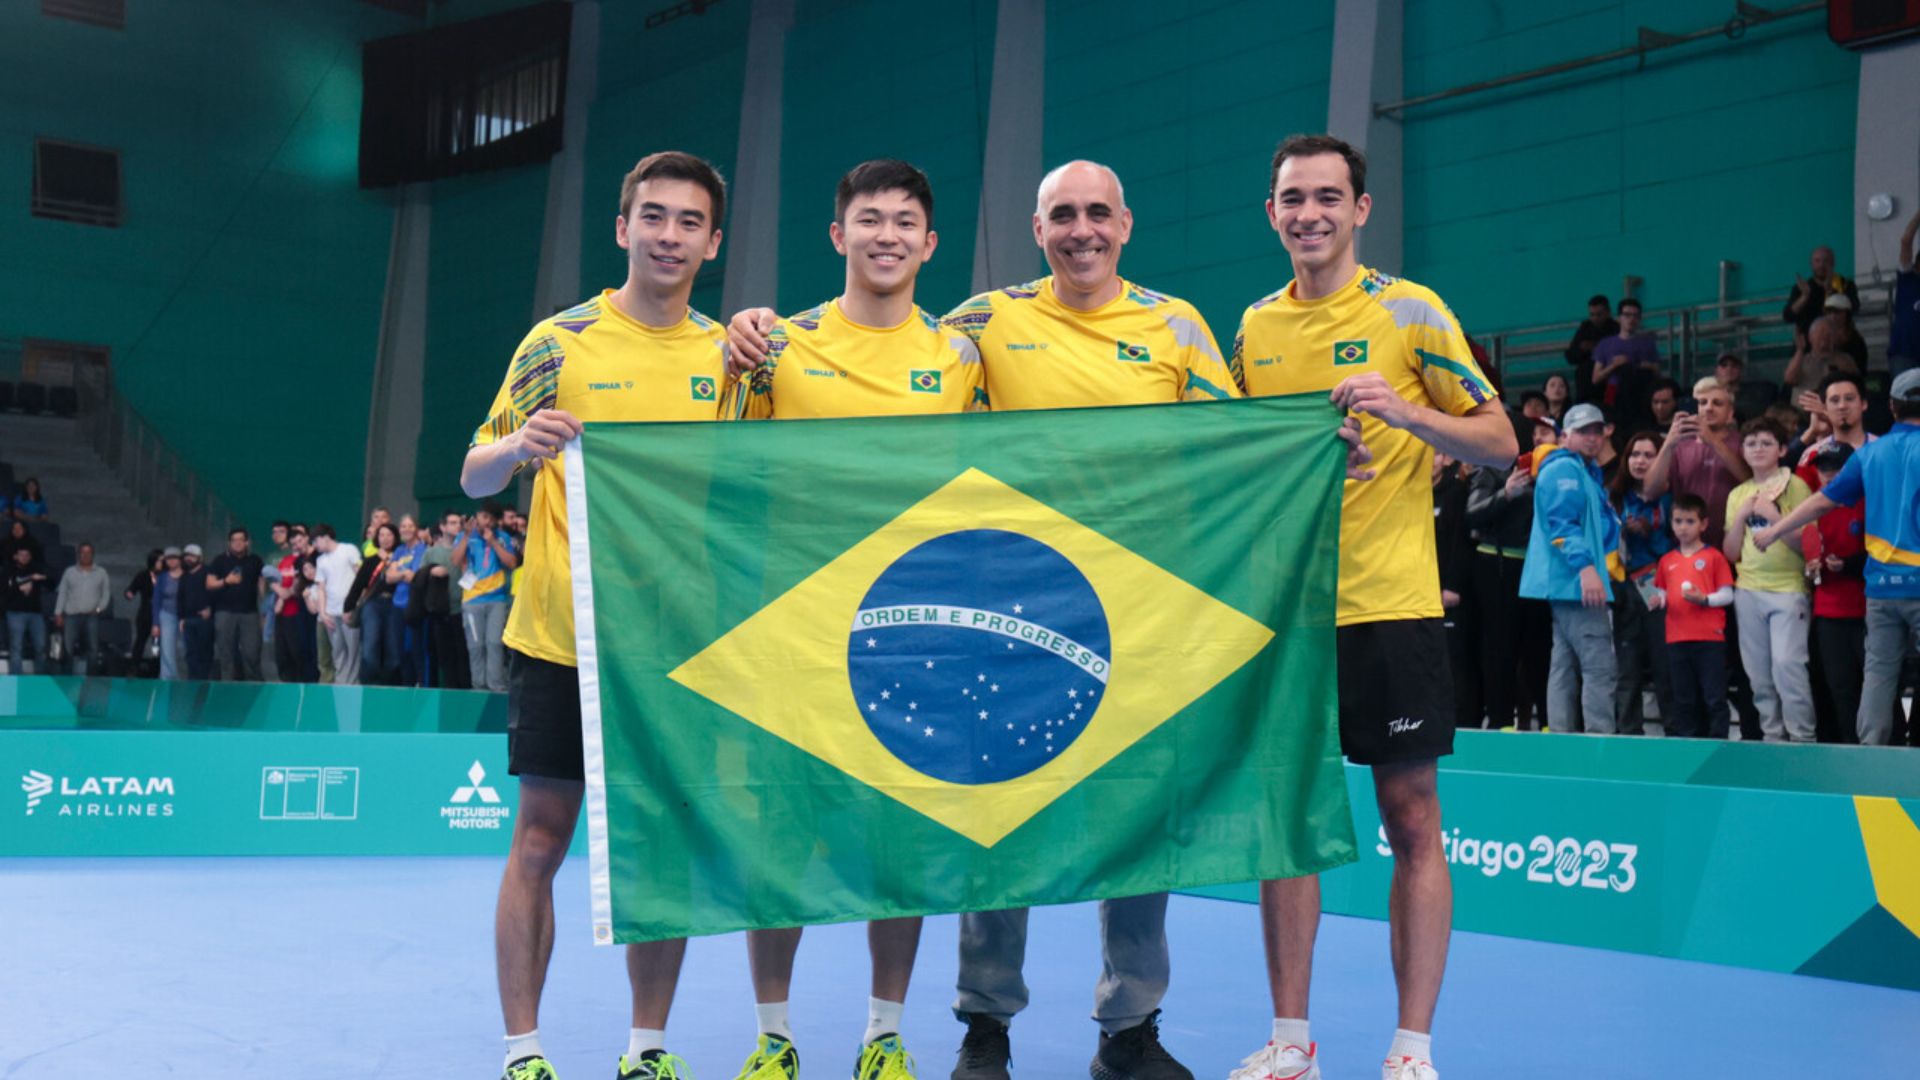 Table Tennis: Brazil Secures a Gold Medal in the Male's Team Final